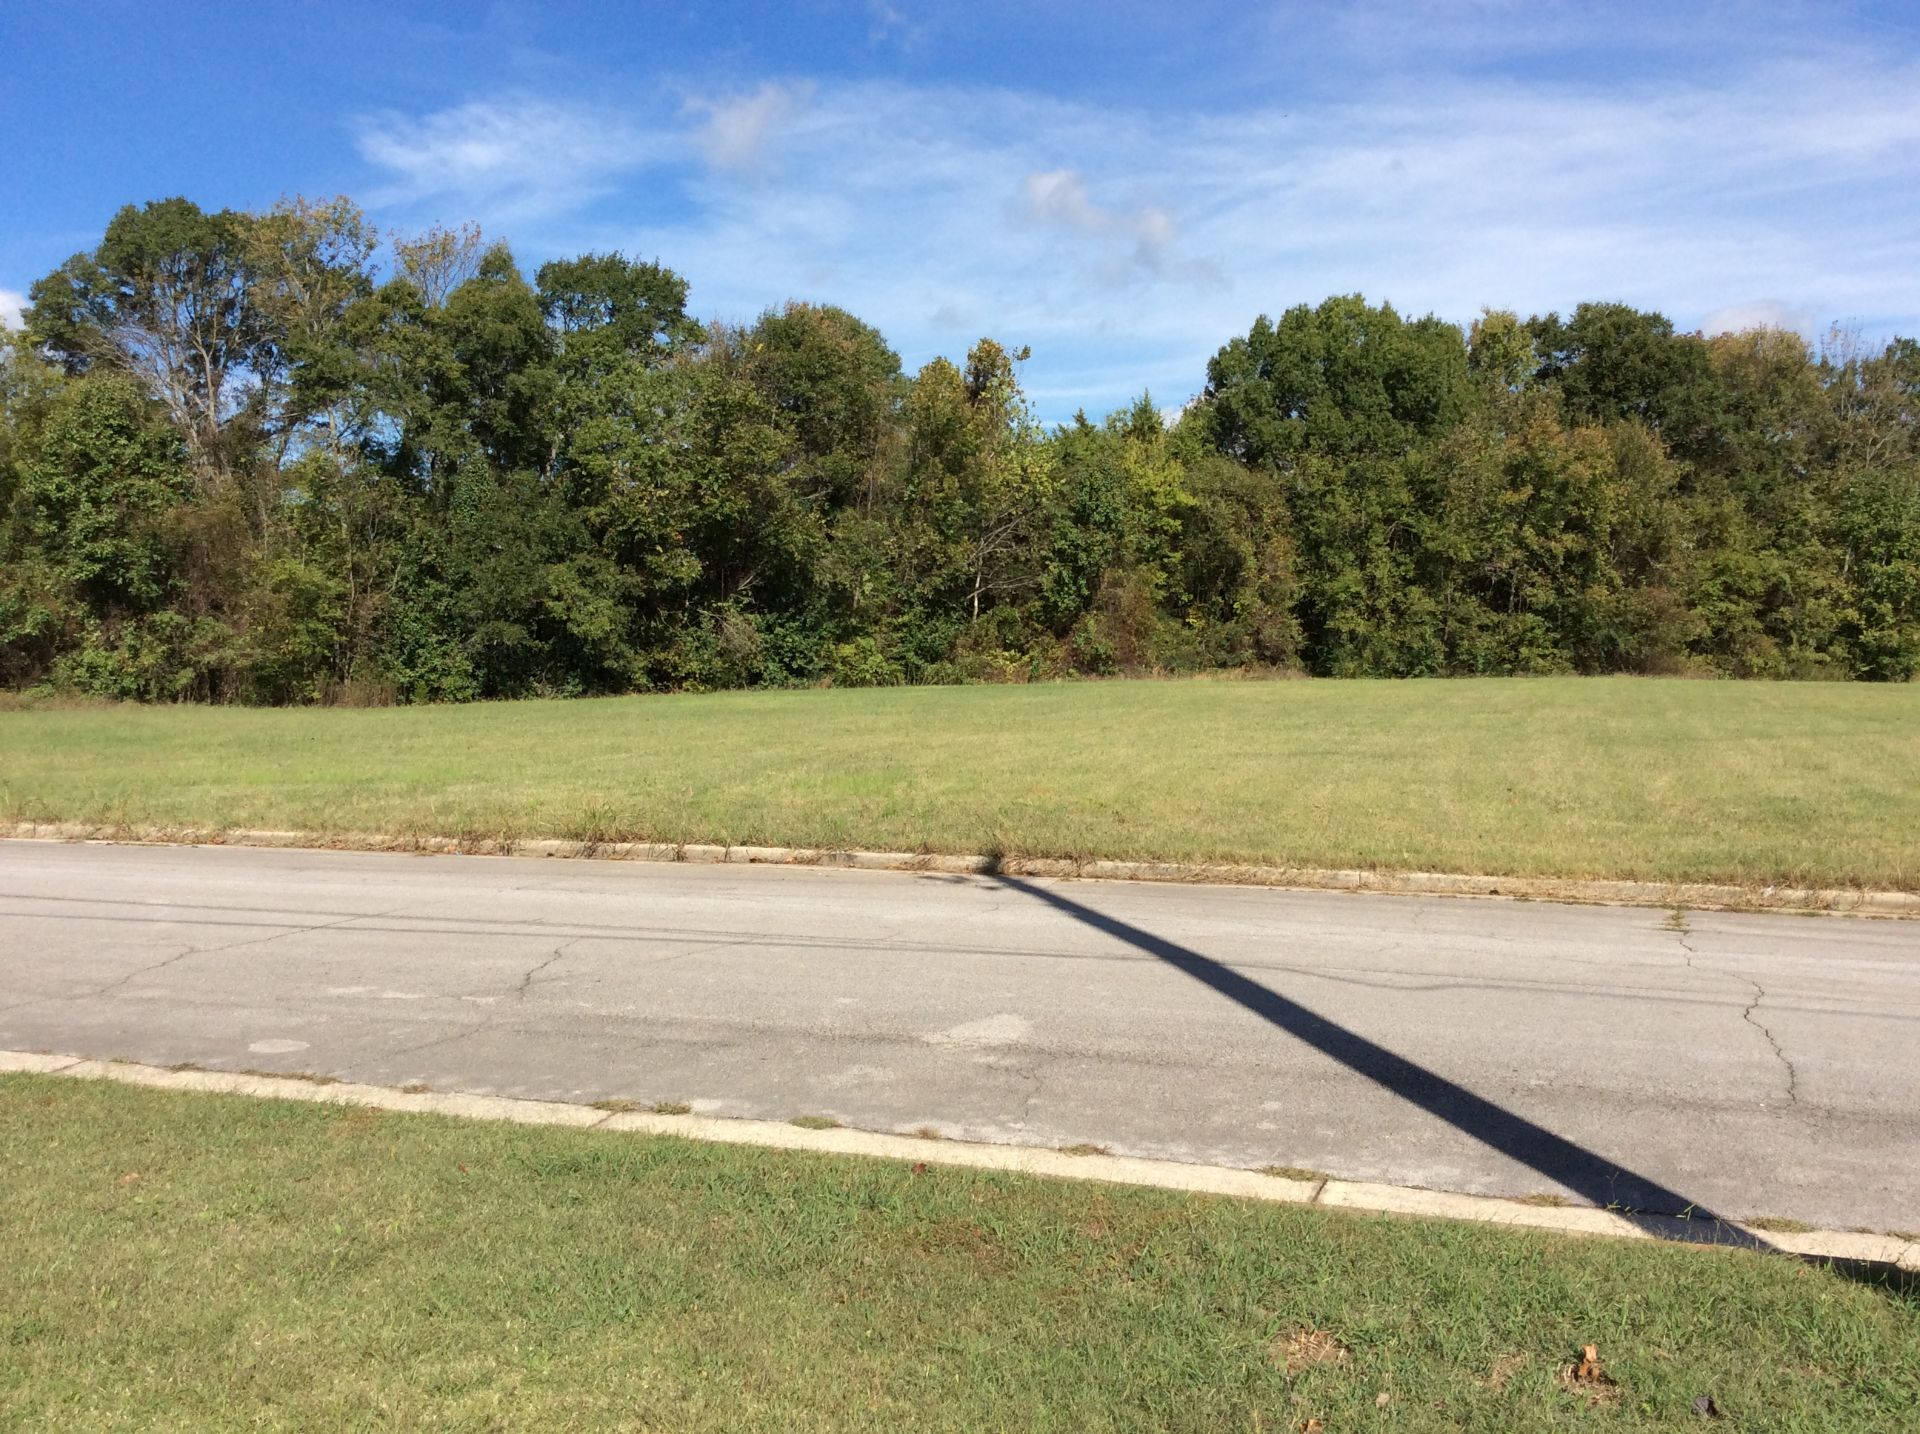 6 Acres± Commerical Lot - Hemingway Drive Decatur, Alabama.  The property is currently zoned R-6.